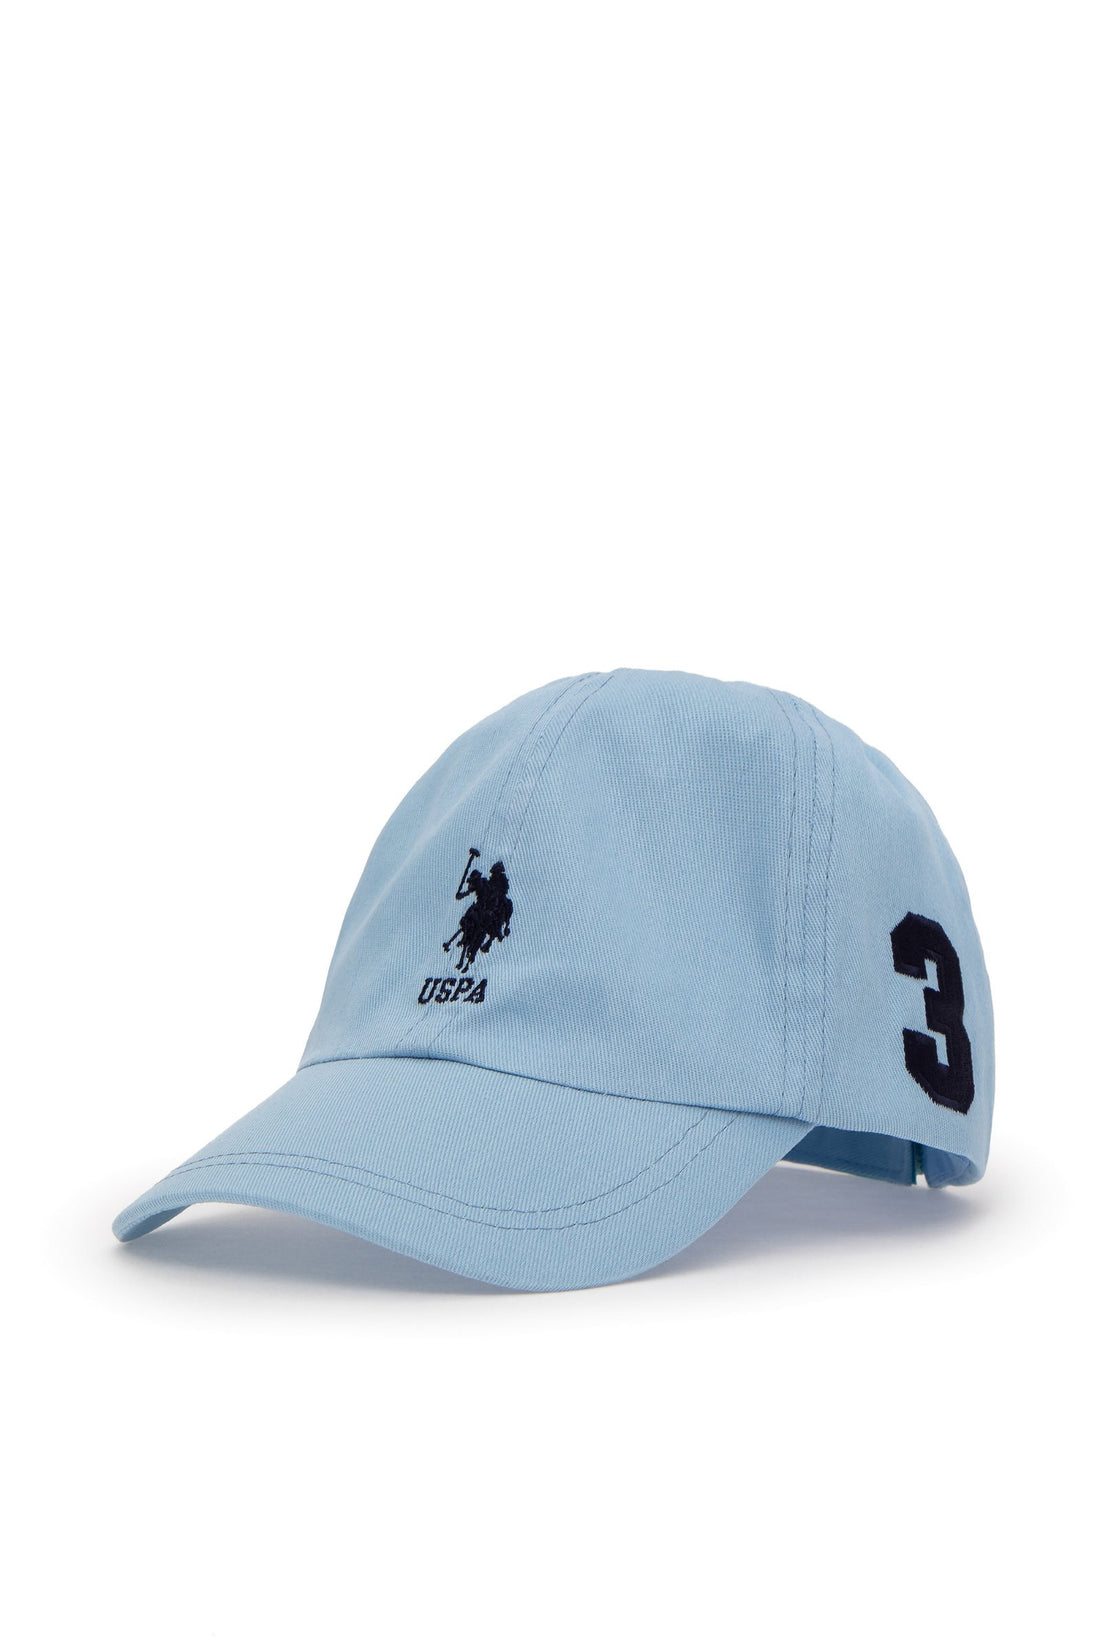 Blue Baseball Cap With Front Logo And Side Design_A083SZ064P01 BAIRD-IY24_VR003_01